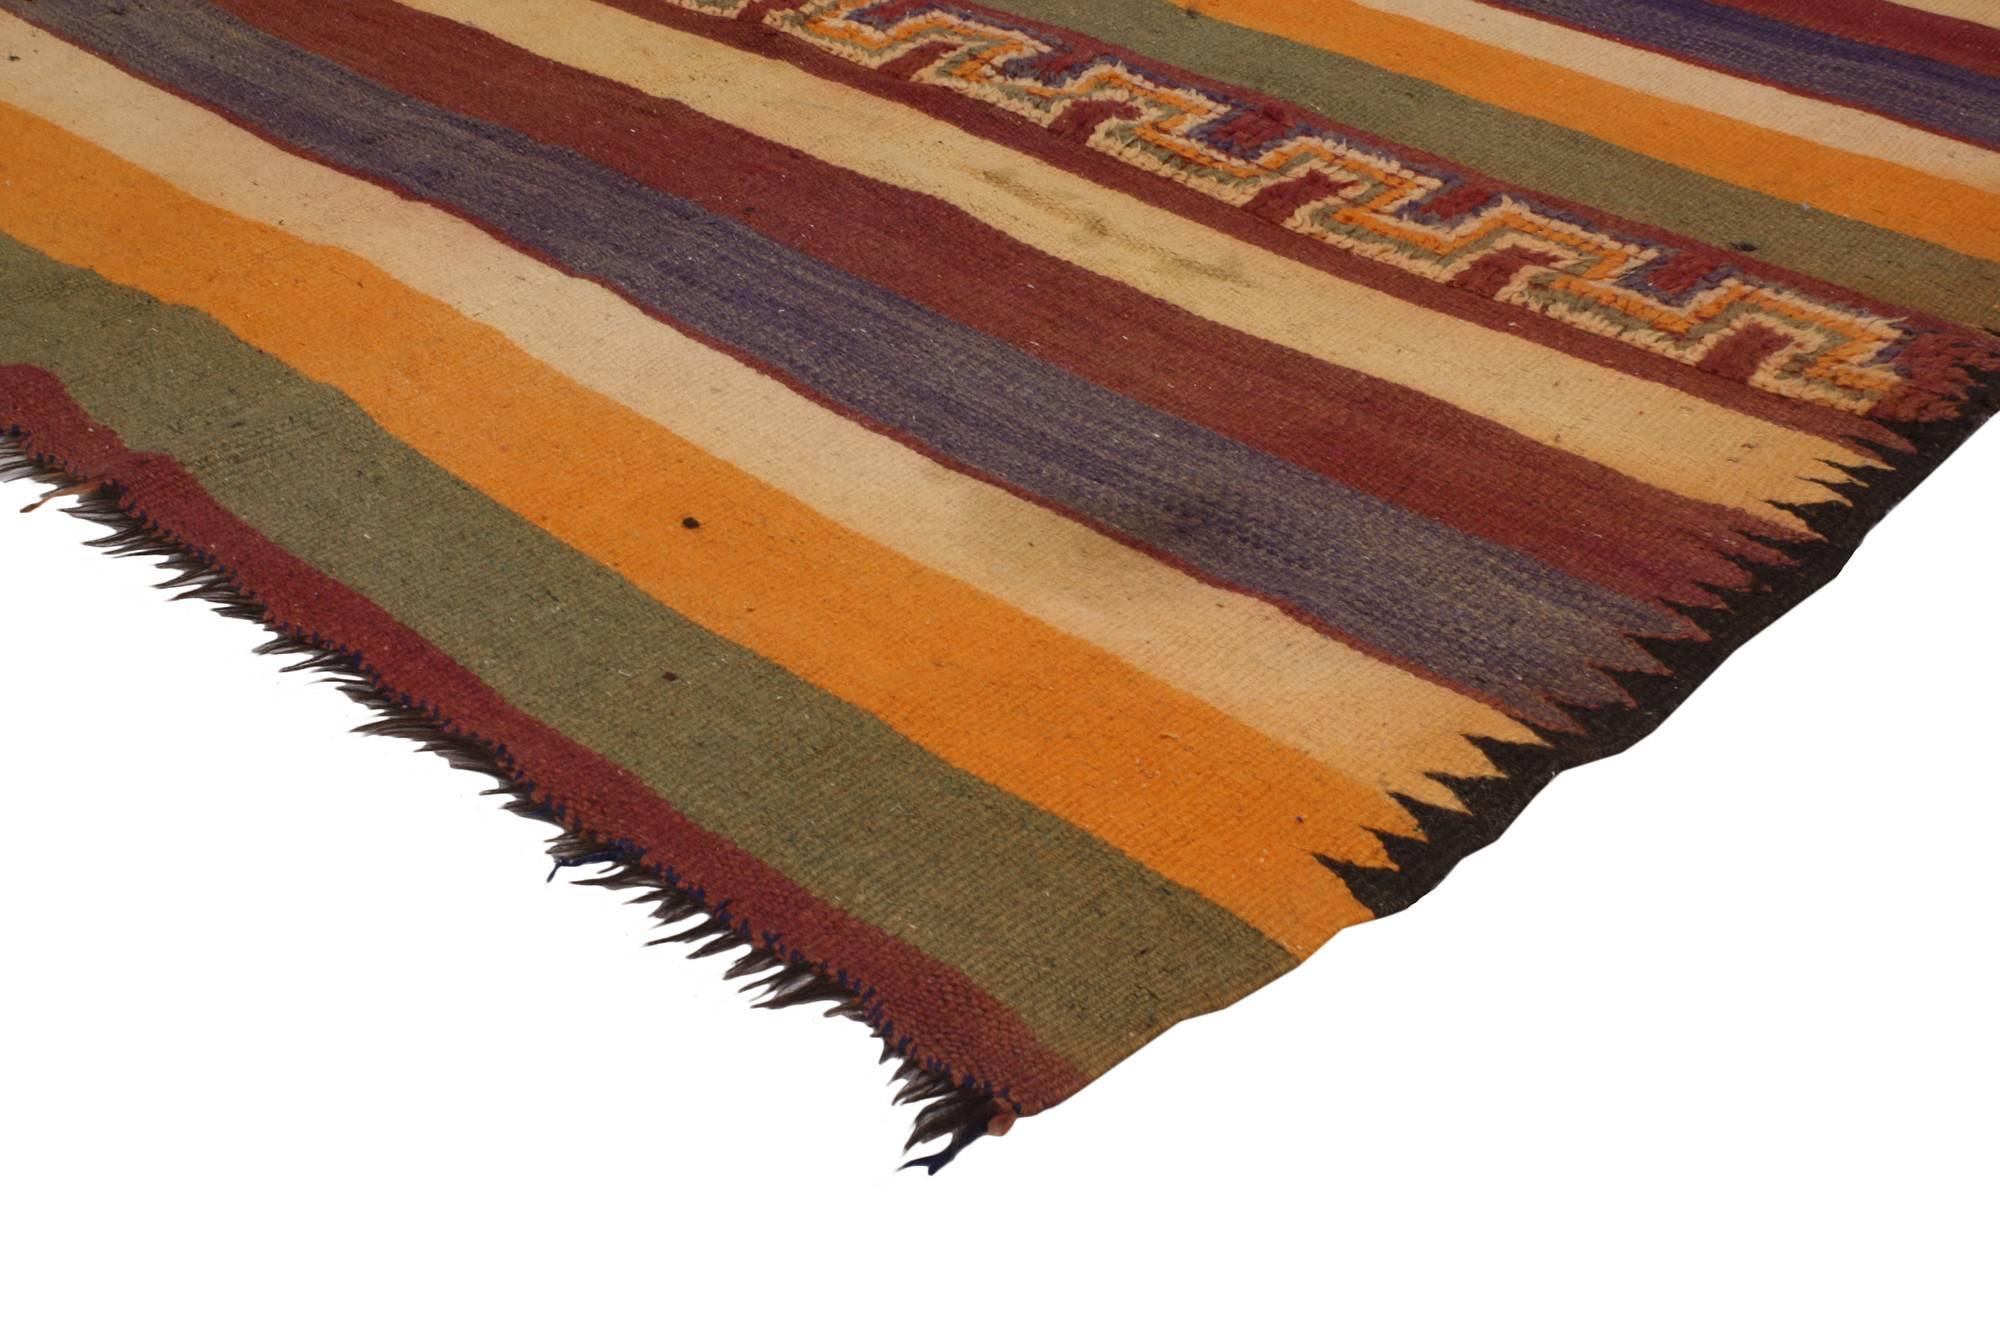 20461 Vintage Berber Moroccan Kilim Rug with Modern Cabin Style, Flat-weave Kilim Rug 03'07 x 12'00.​​ Displaying nomadic charm and time-softened colors, this hand-woven vintage Berber Moroccan Kilim rug can create a global look from around the